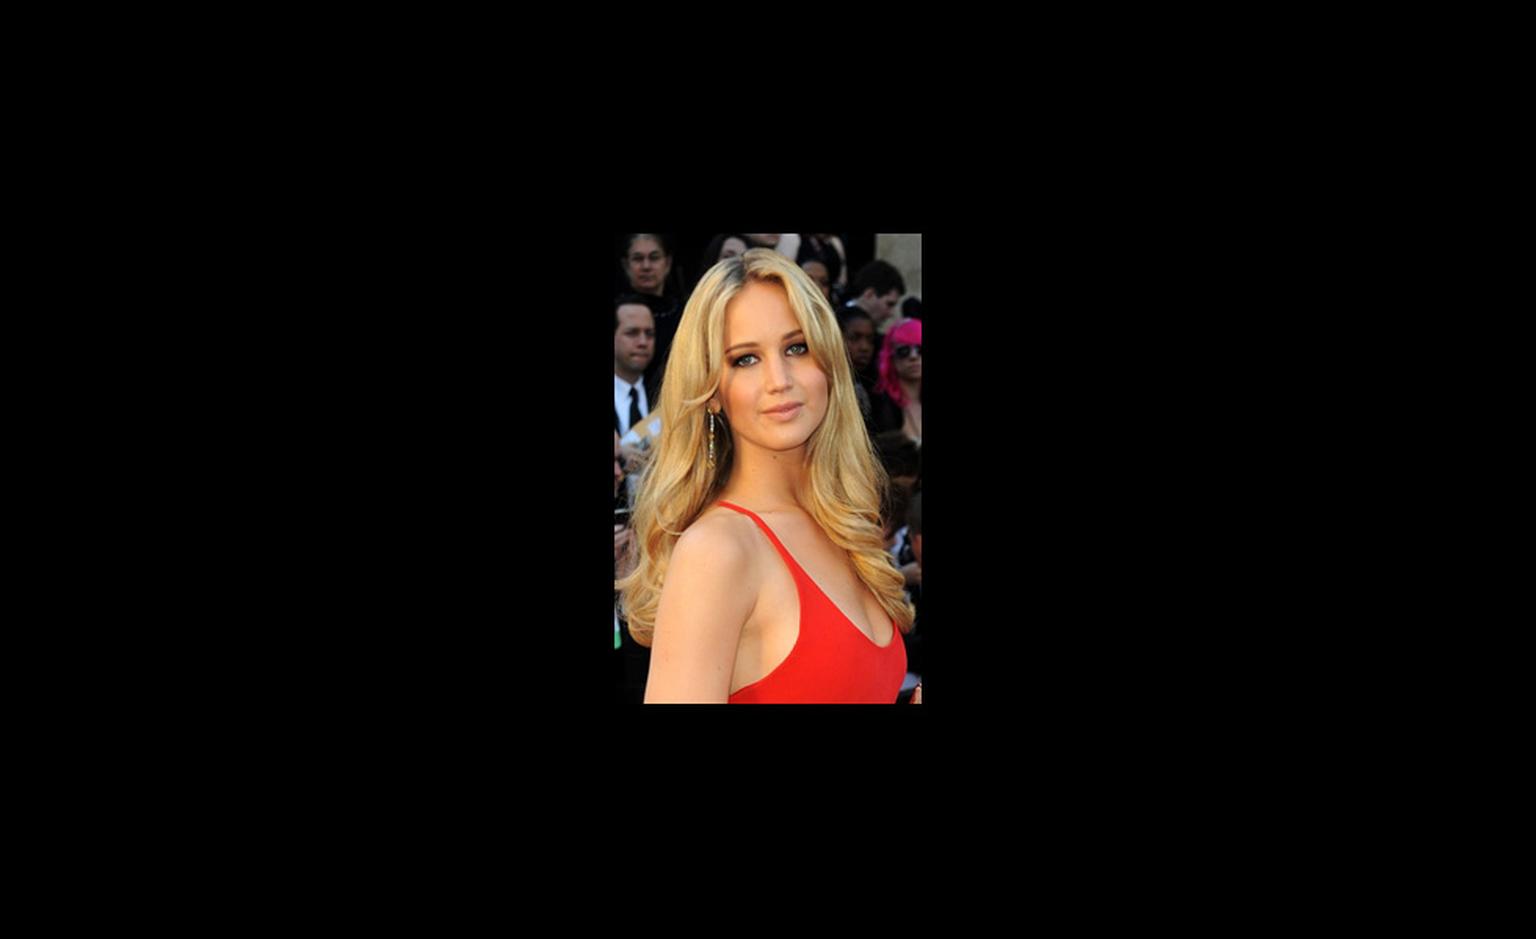 Jennifer Lawrence wears long platinum earrings set with 16 carats of diamonds with a 42 carat diamond bracelet both by Chopard. The diamonds added a flash of light to her pared down look of a red dress by Calvin Klein and long loose hair.